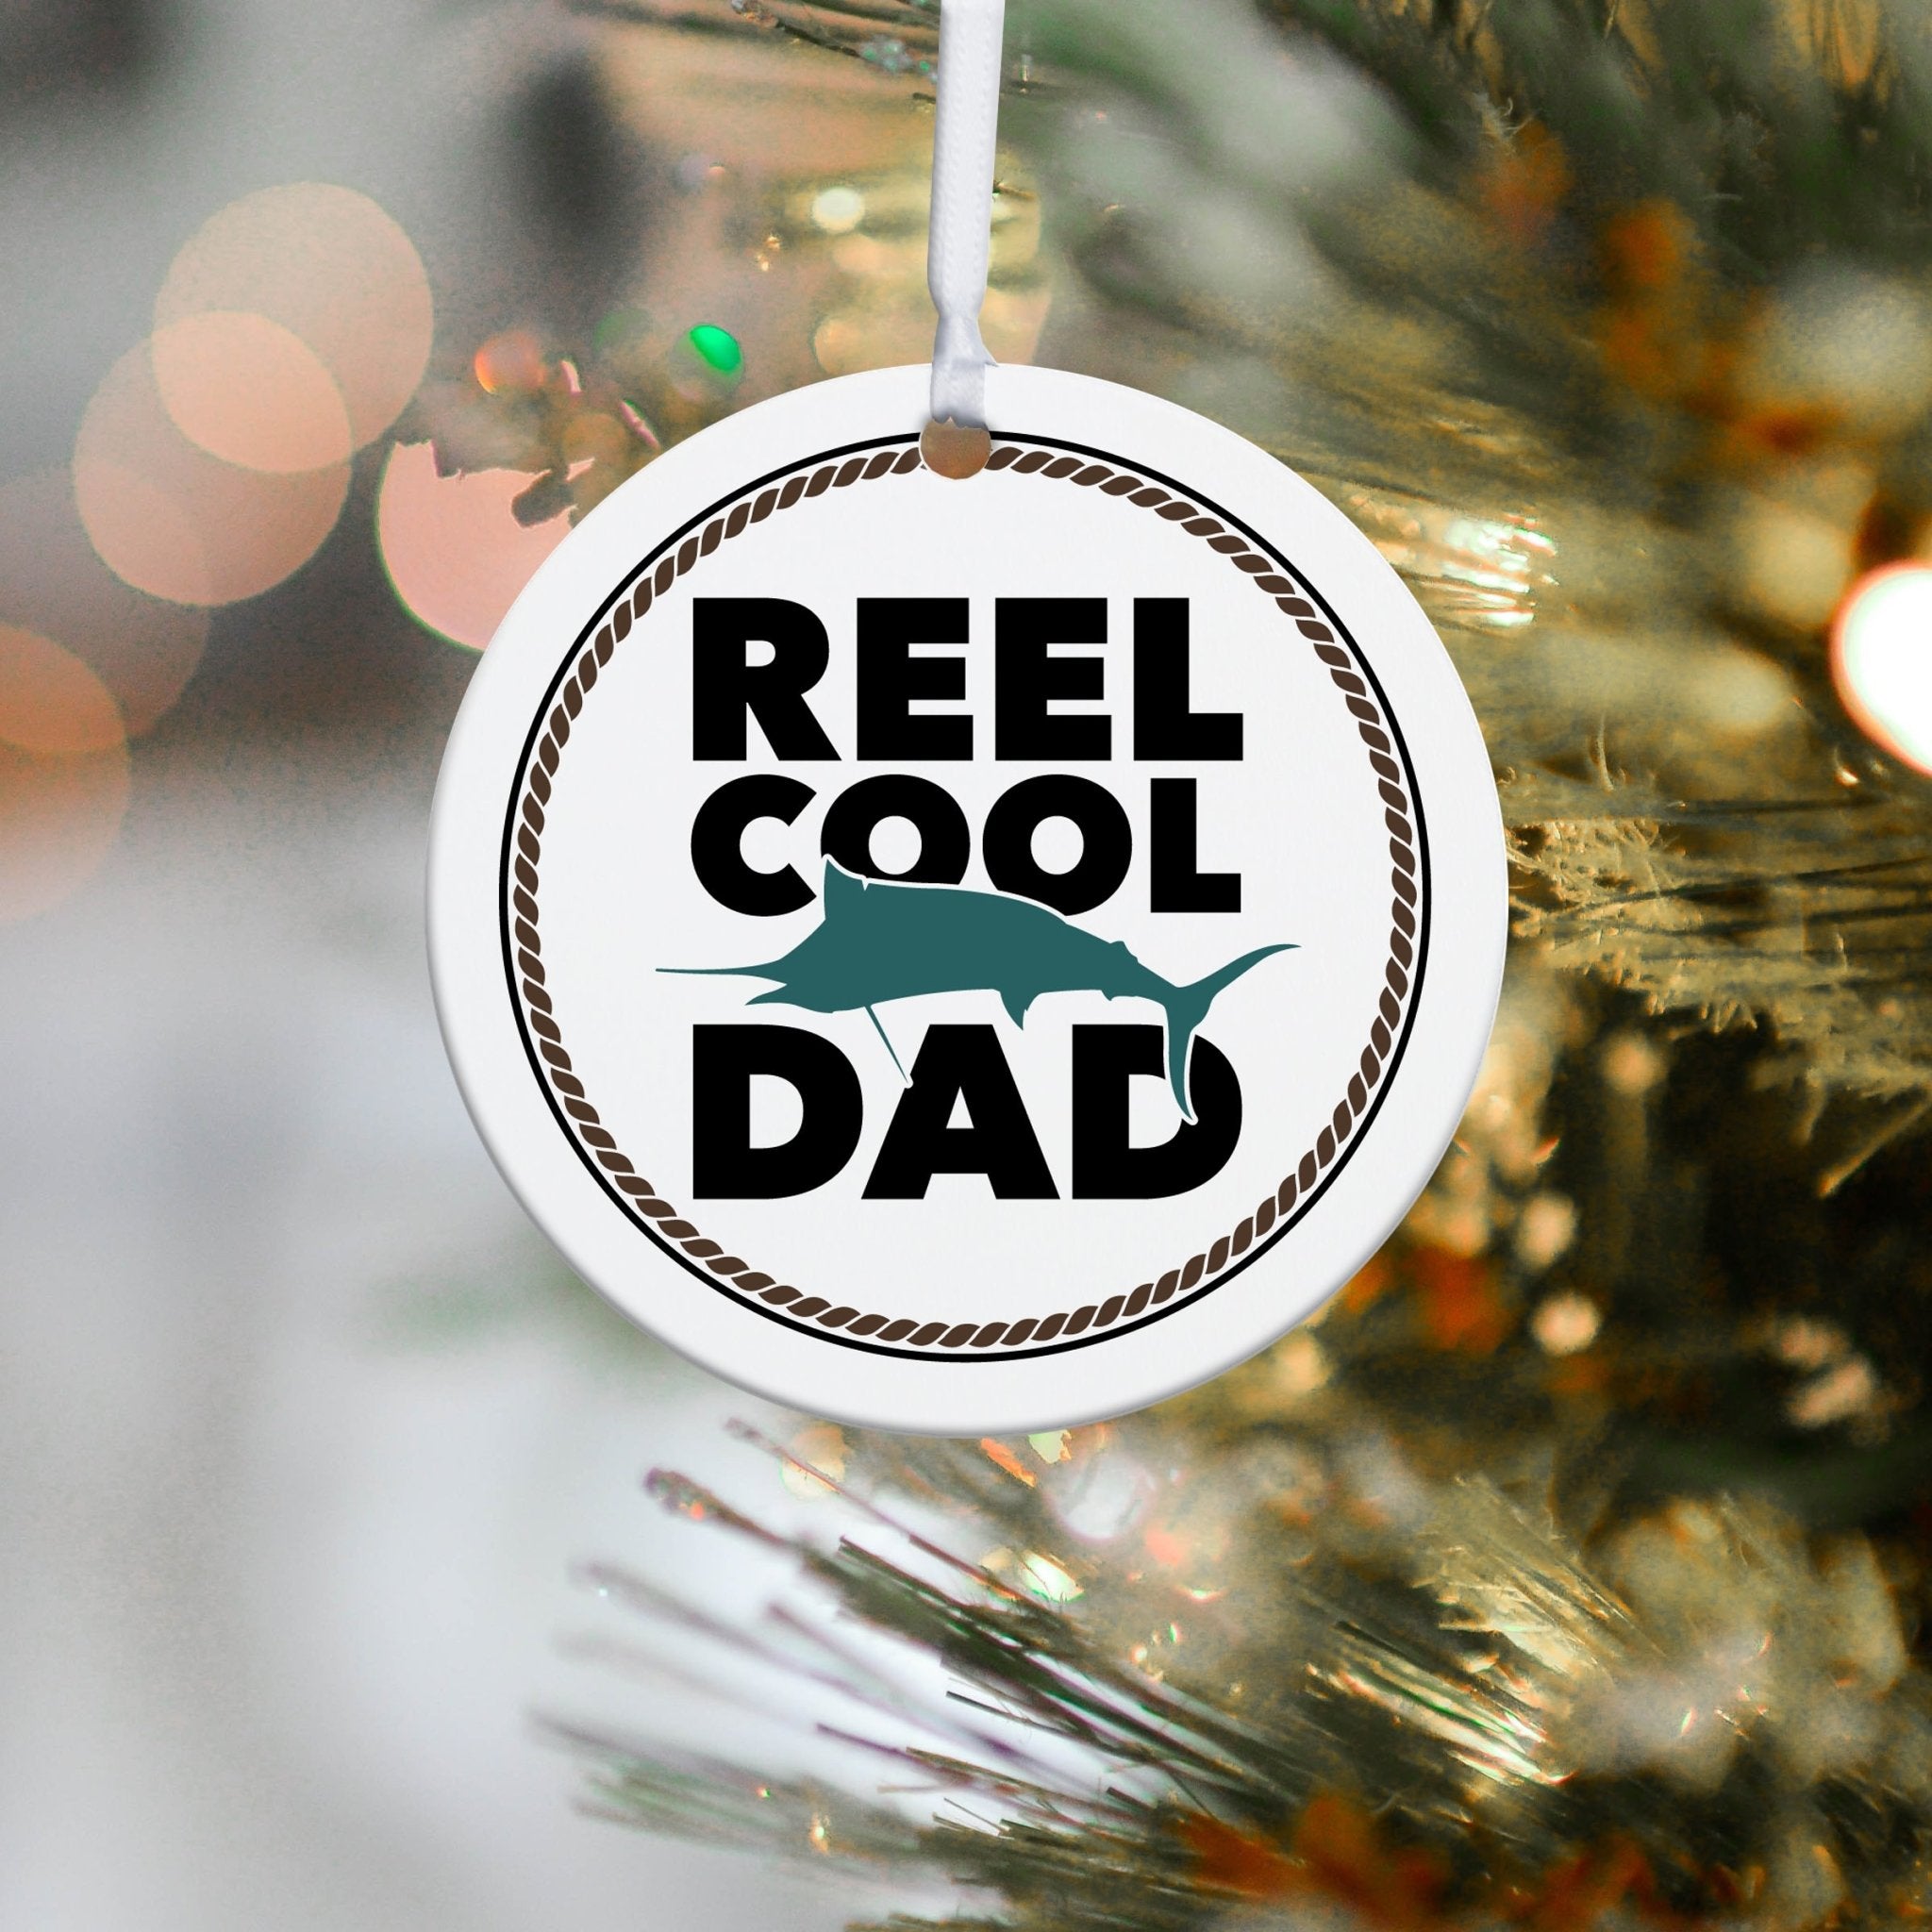 Fishing Dad White Ornament with Inspirational Message Gift Ideas - Reel Cool Dad